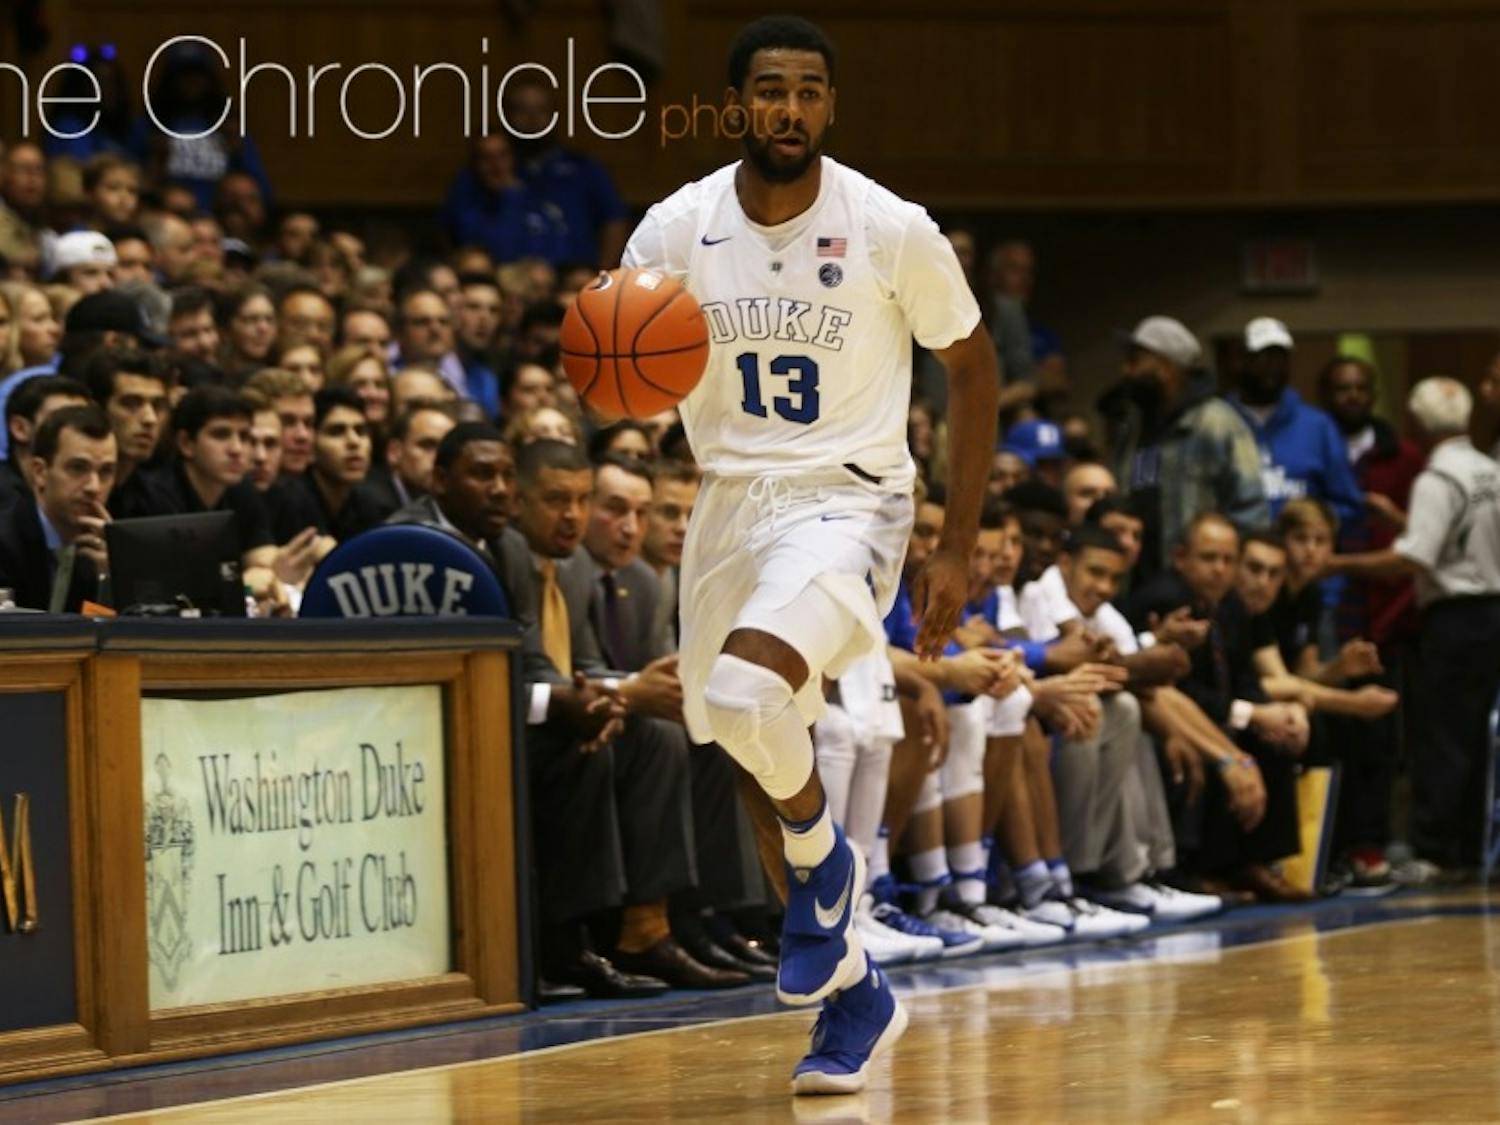 Matt Jones could be called on to help defend Miles Bridges Tuesday for the Blue Devils.